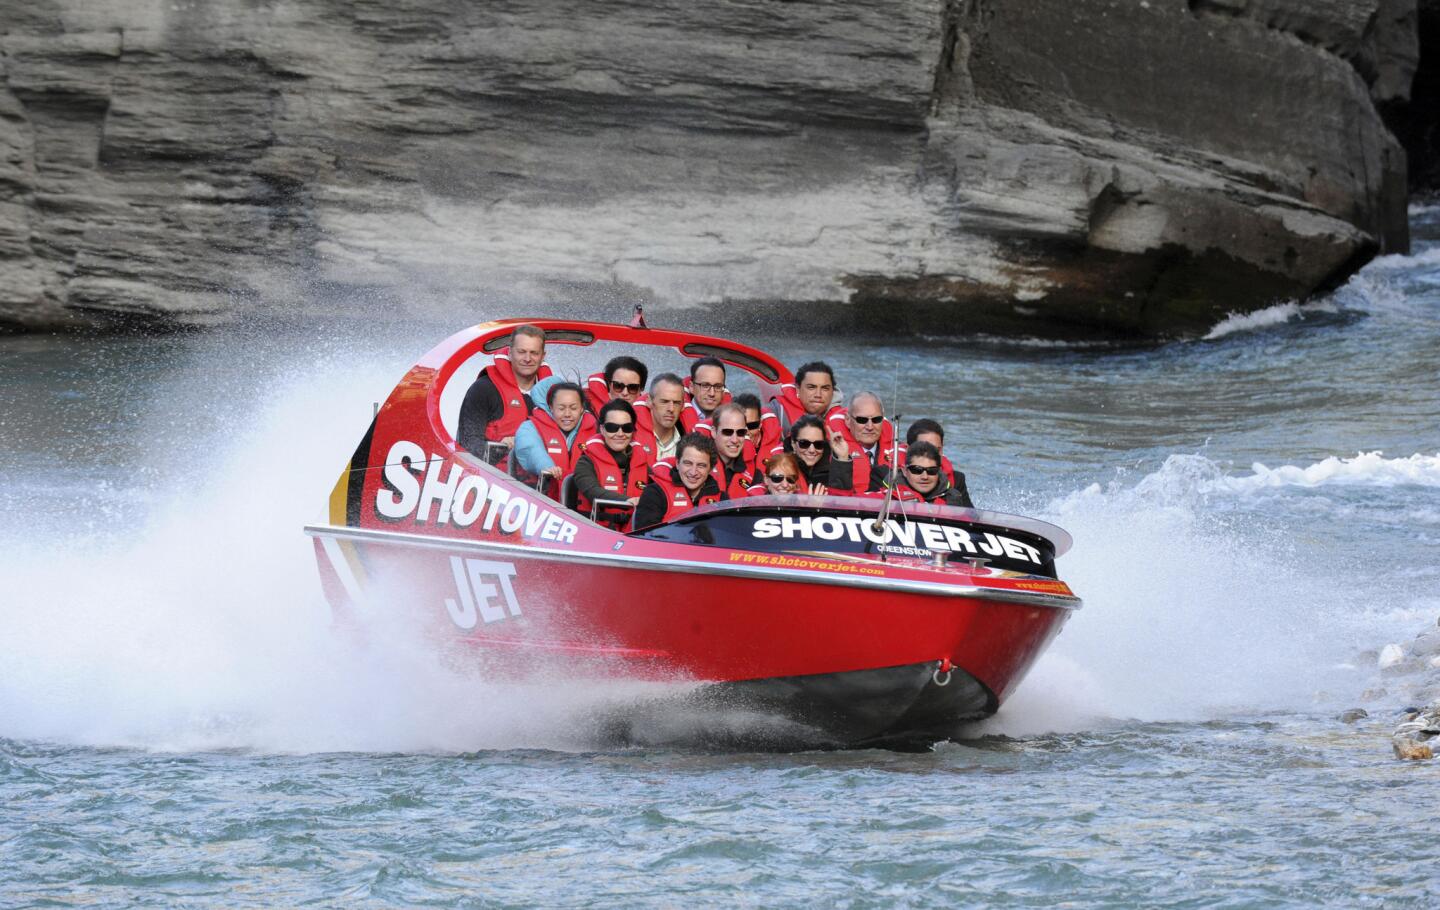 Britain's Prince William, center, and his wife Kate take a ride on a jet boat along the Shotover River in Queenstown, New Zealand, on Sunday.